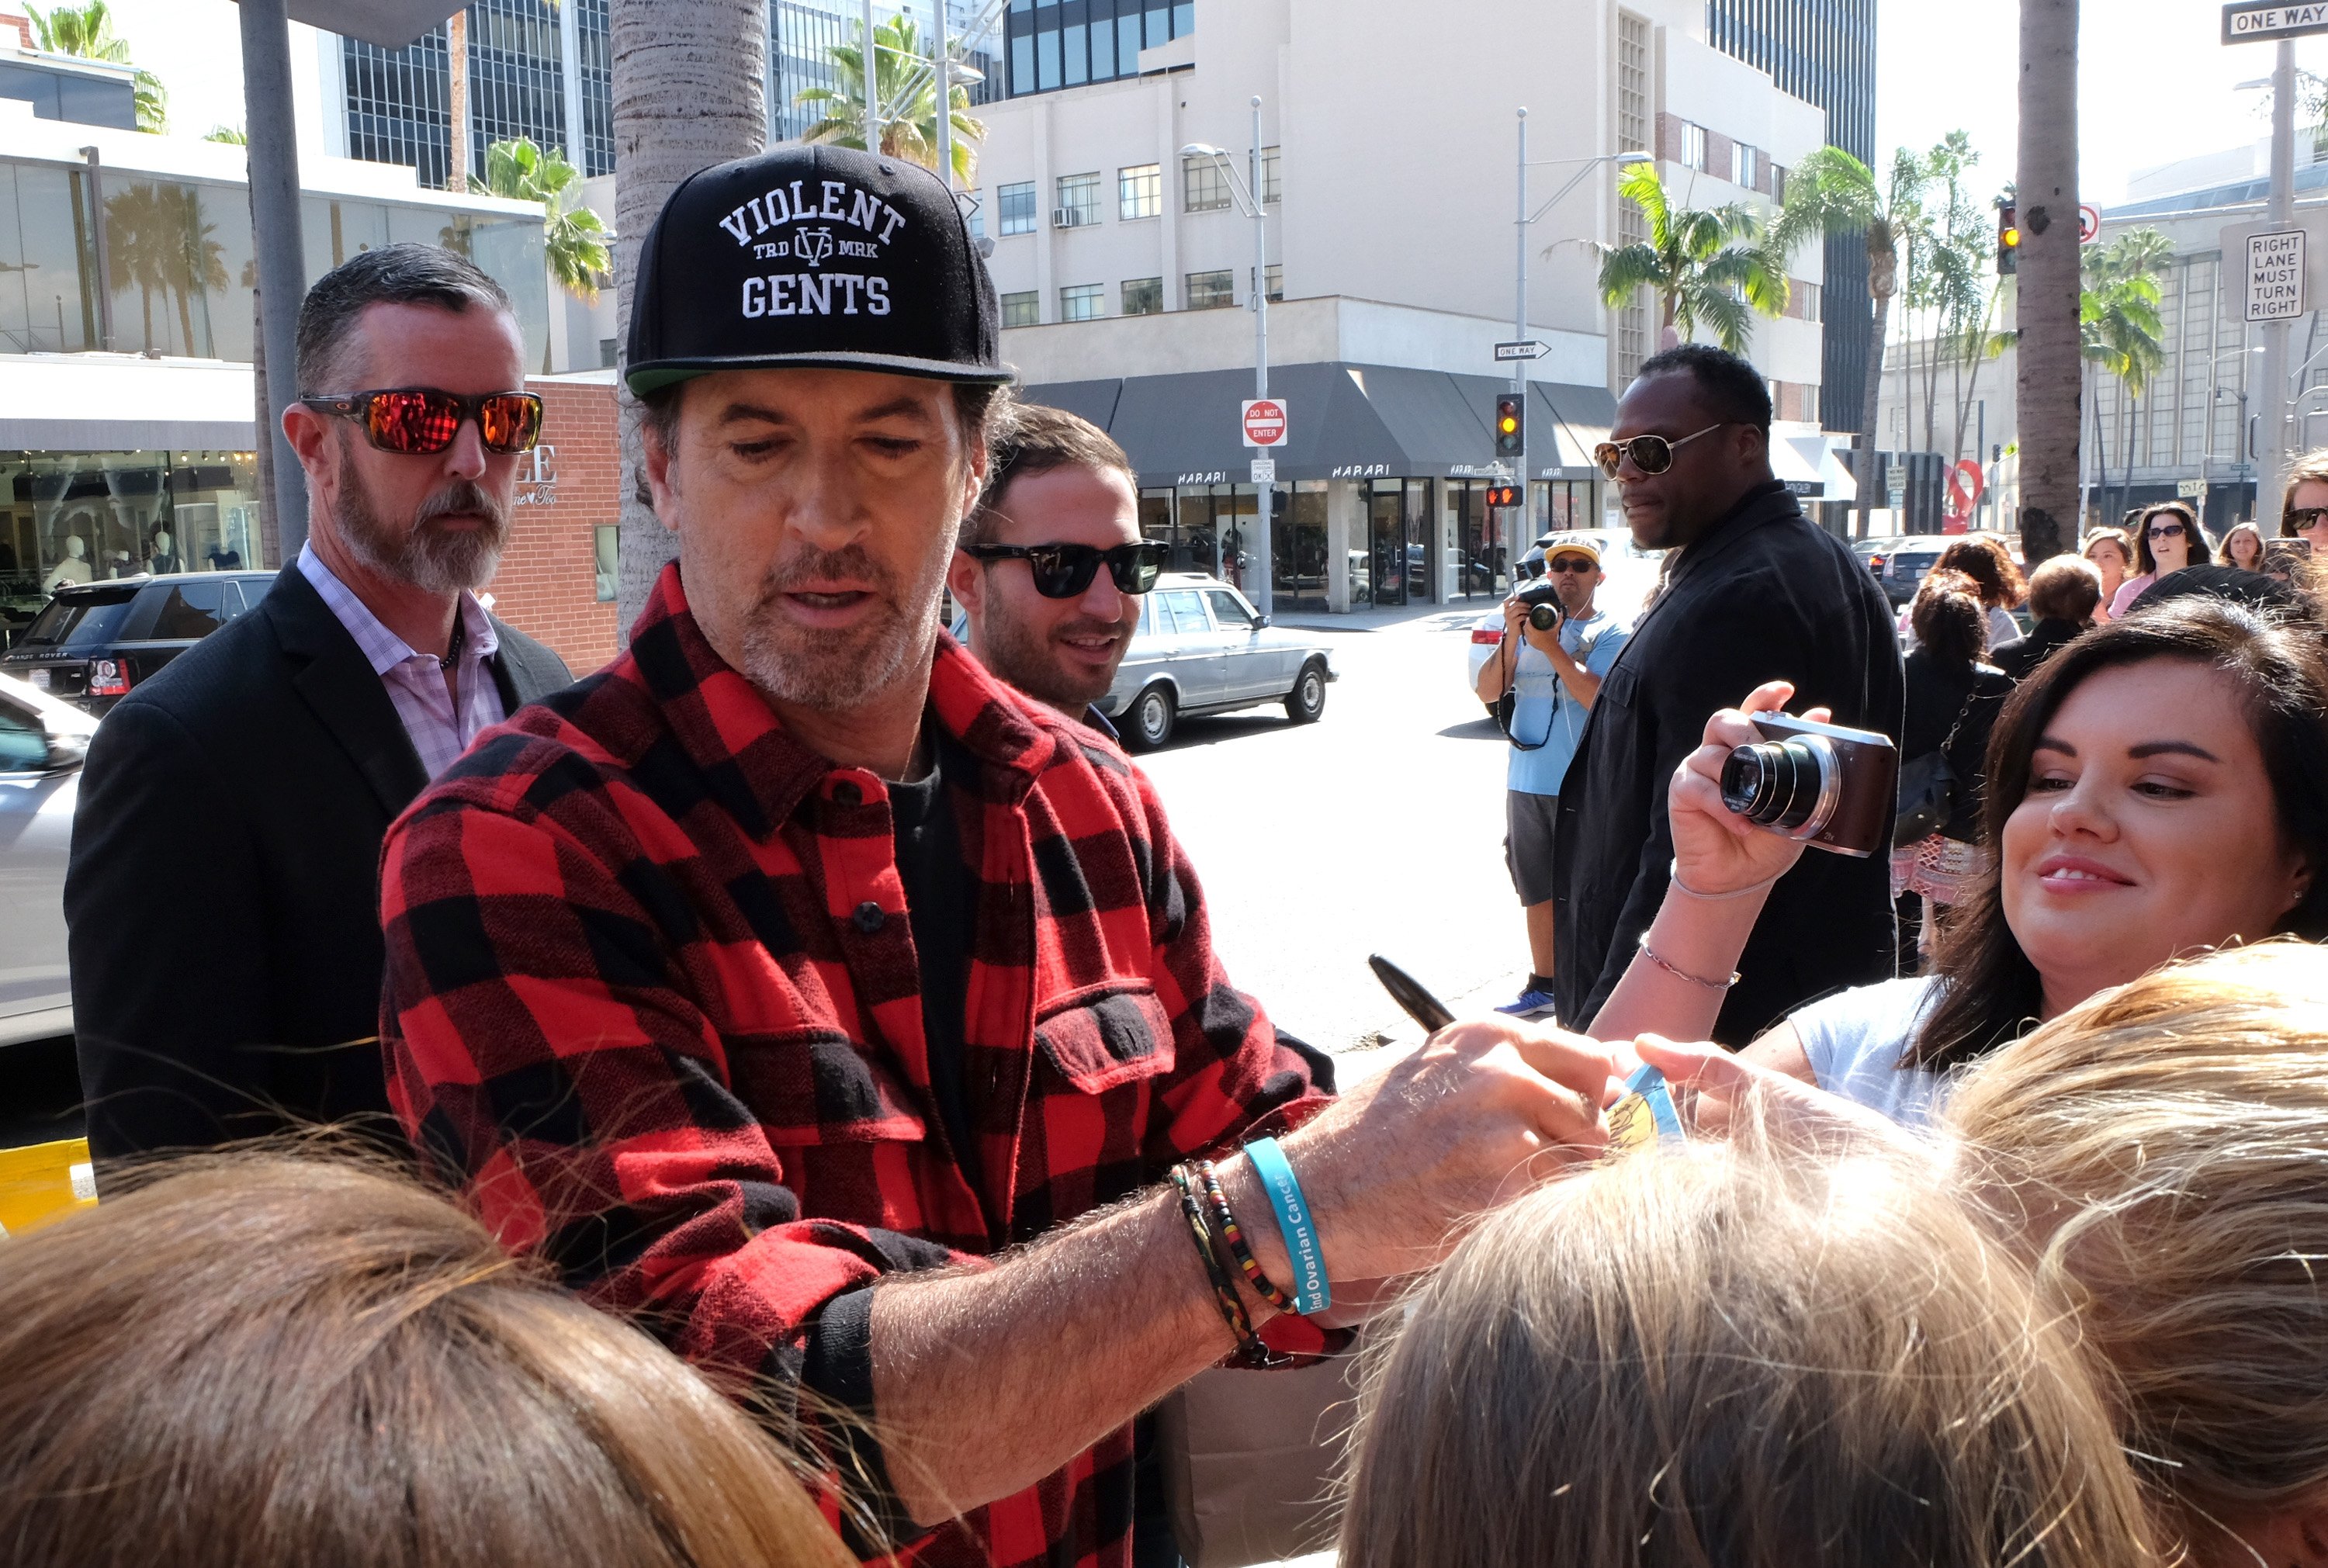 Scott Patterson signs autographs during a 'Gilmore Girls' pop up event in 2016